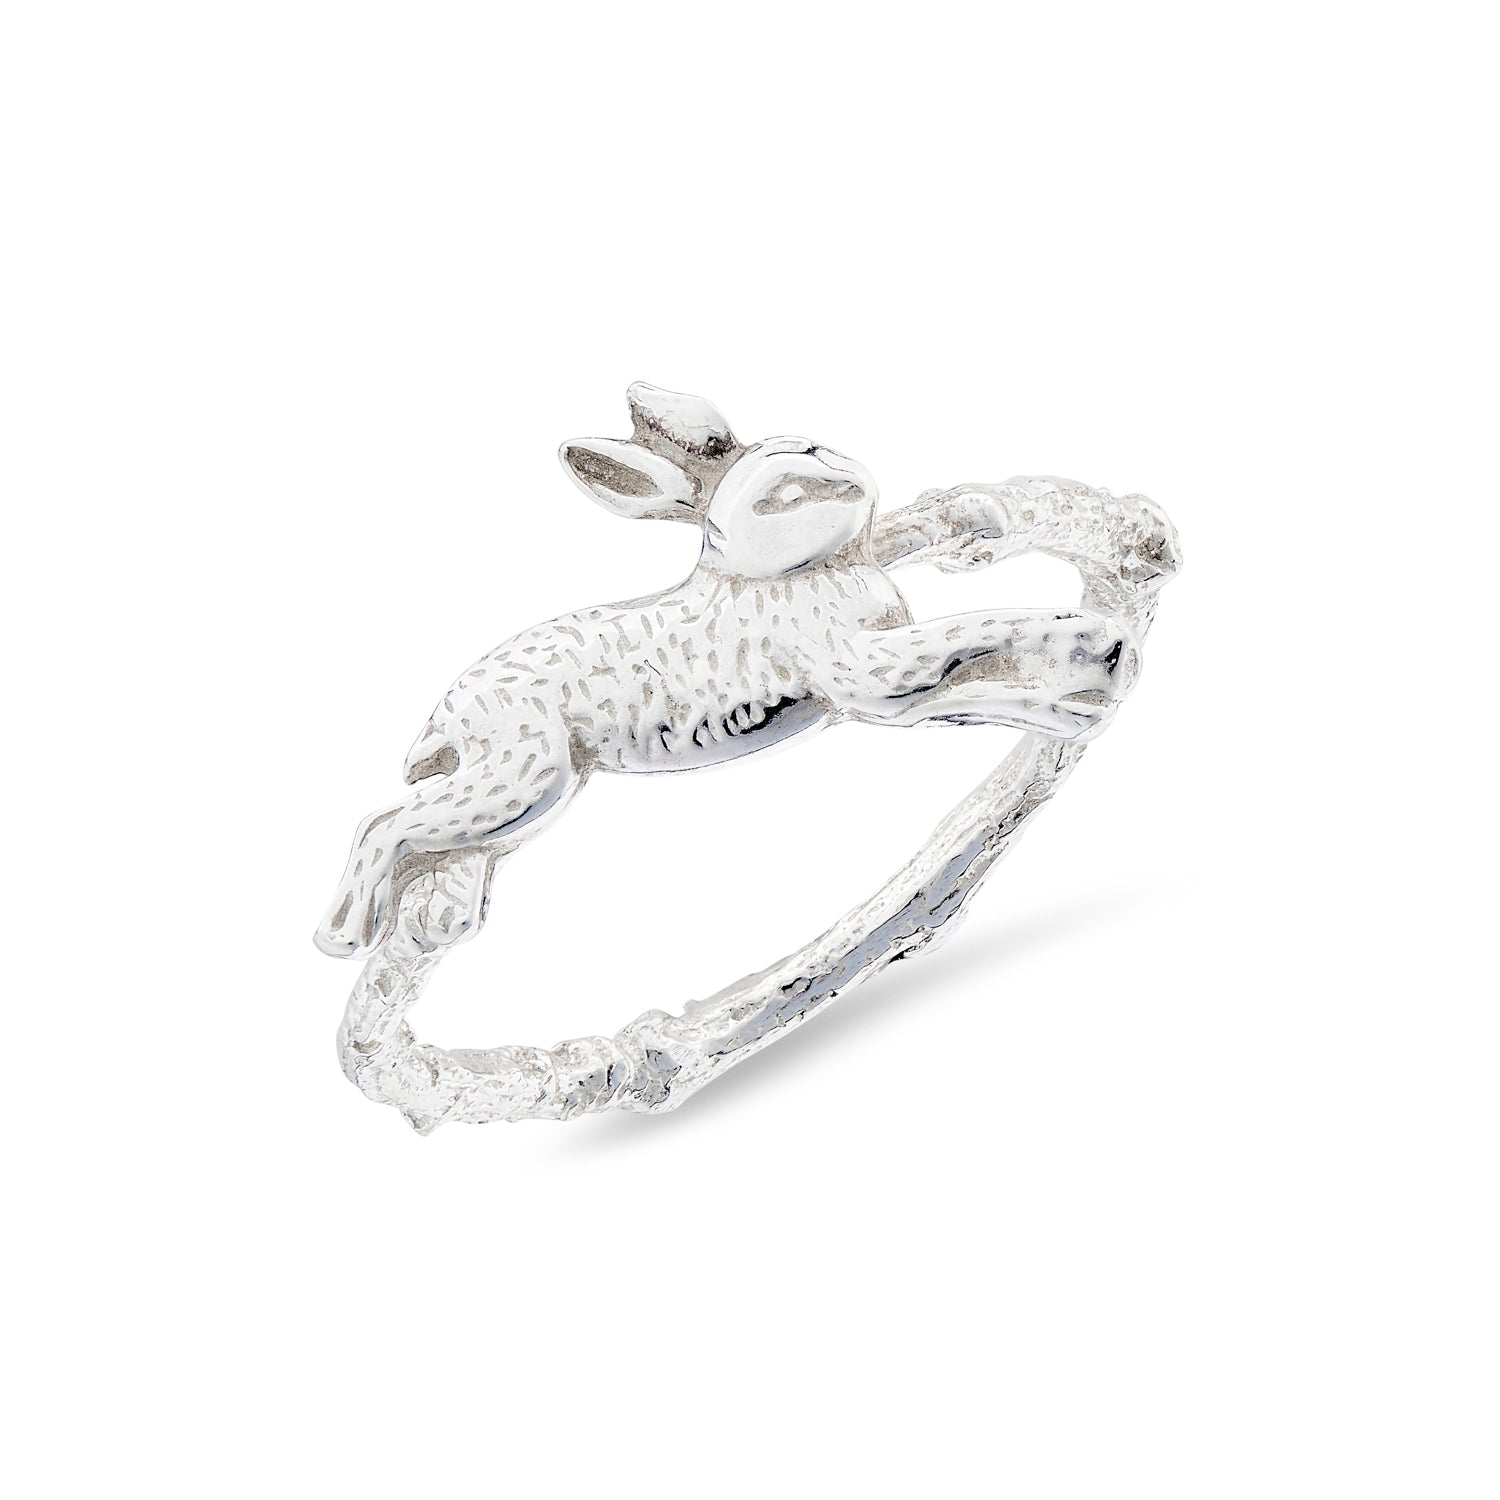 Hare twig stacking ring